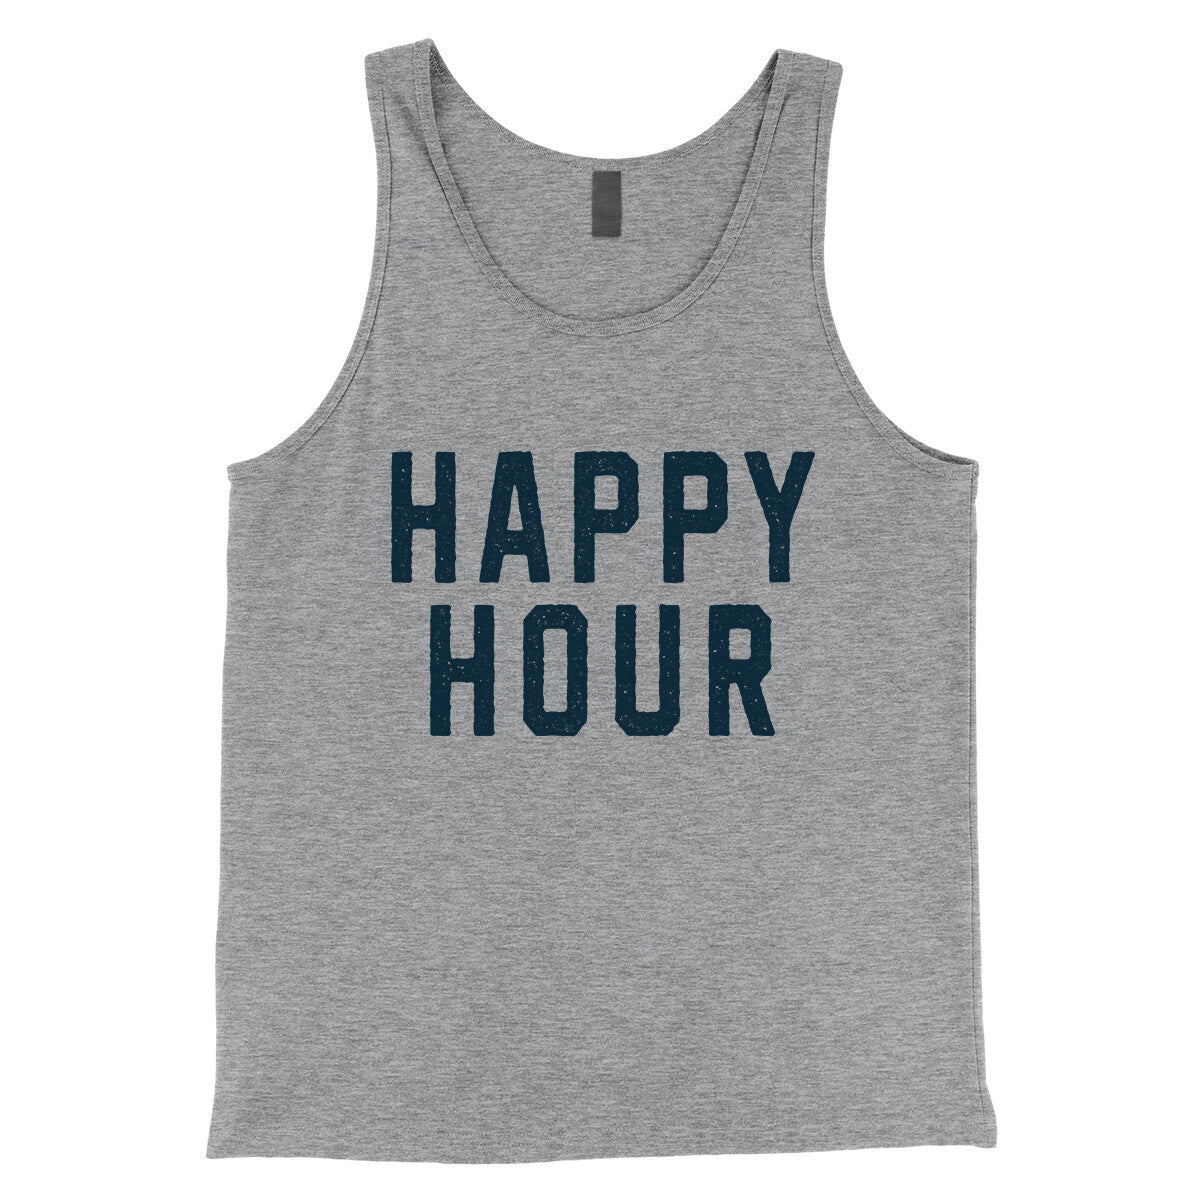 Happy Hour in Athletic Heather Color